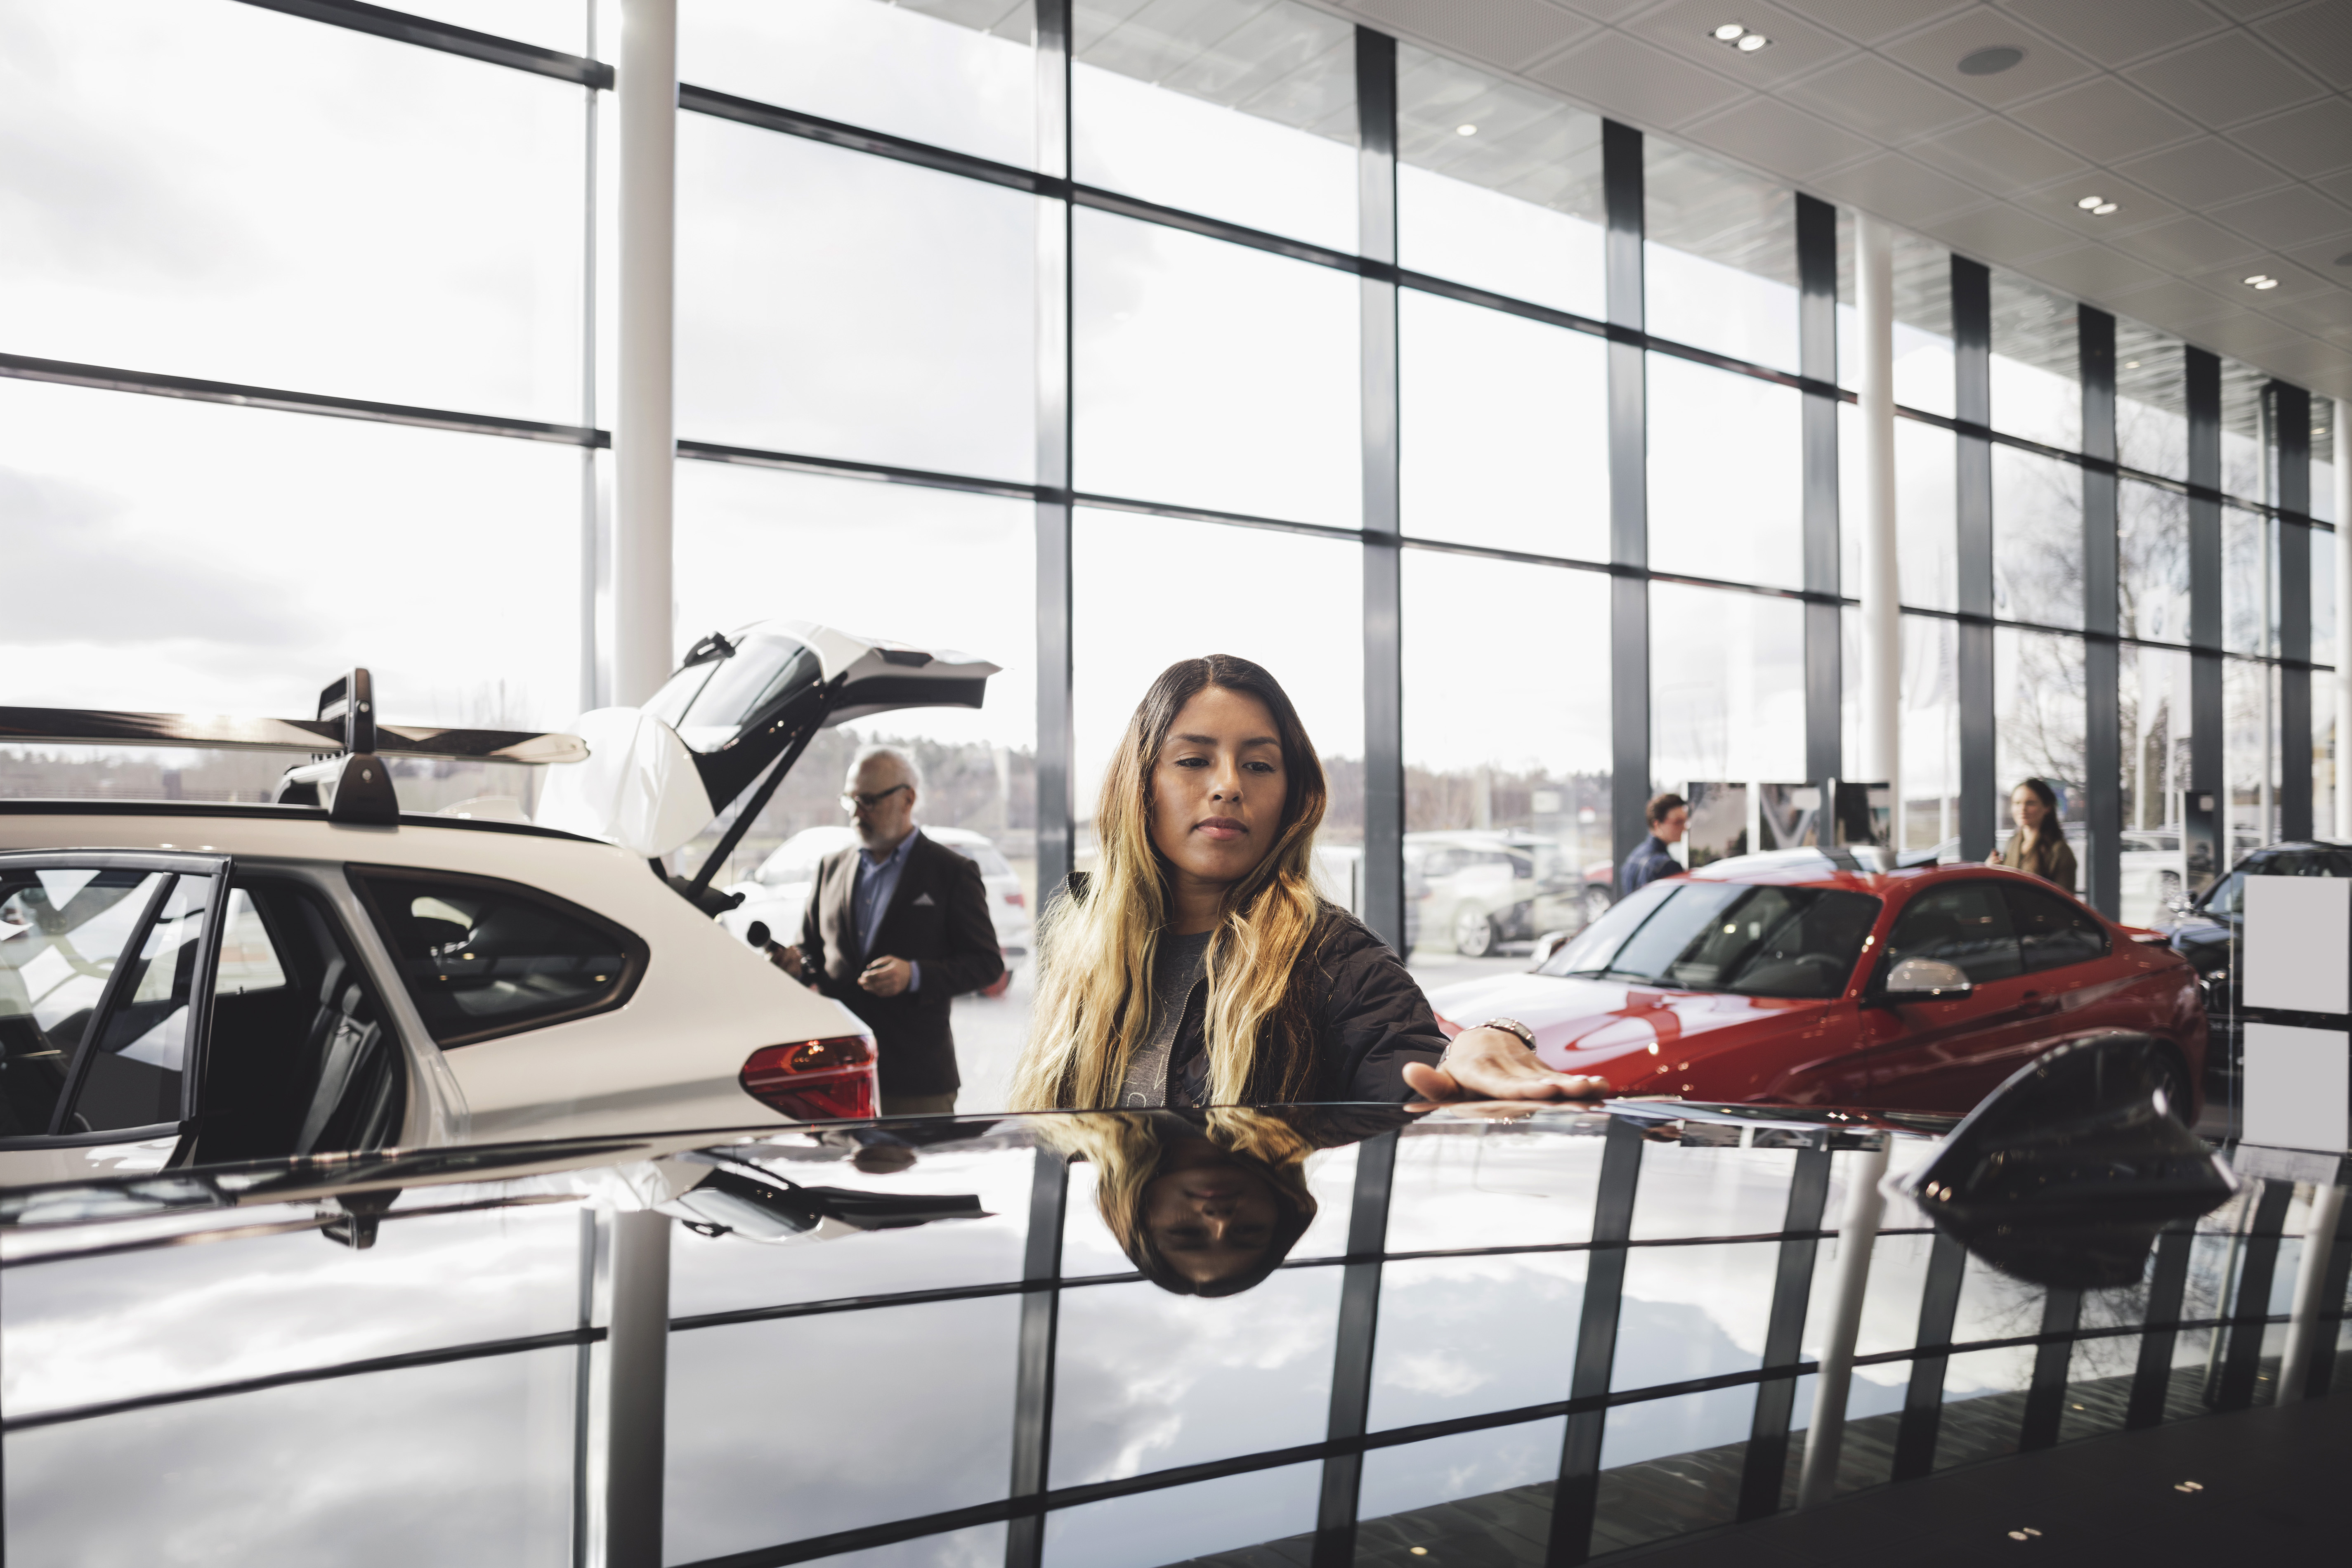 A long-haired woman in a car dealership, looking at a vehicle, with other customers in the background